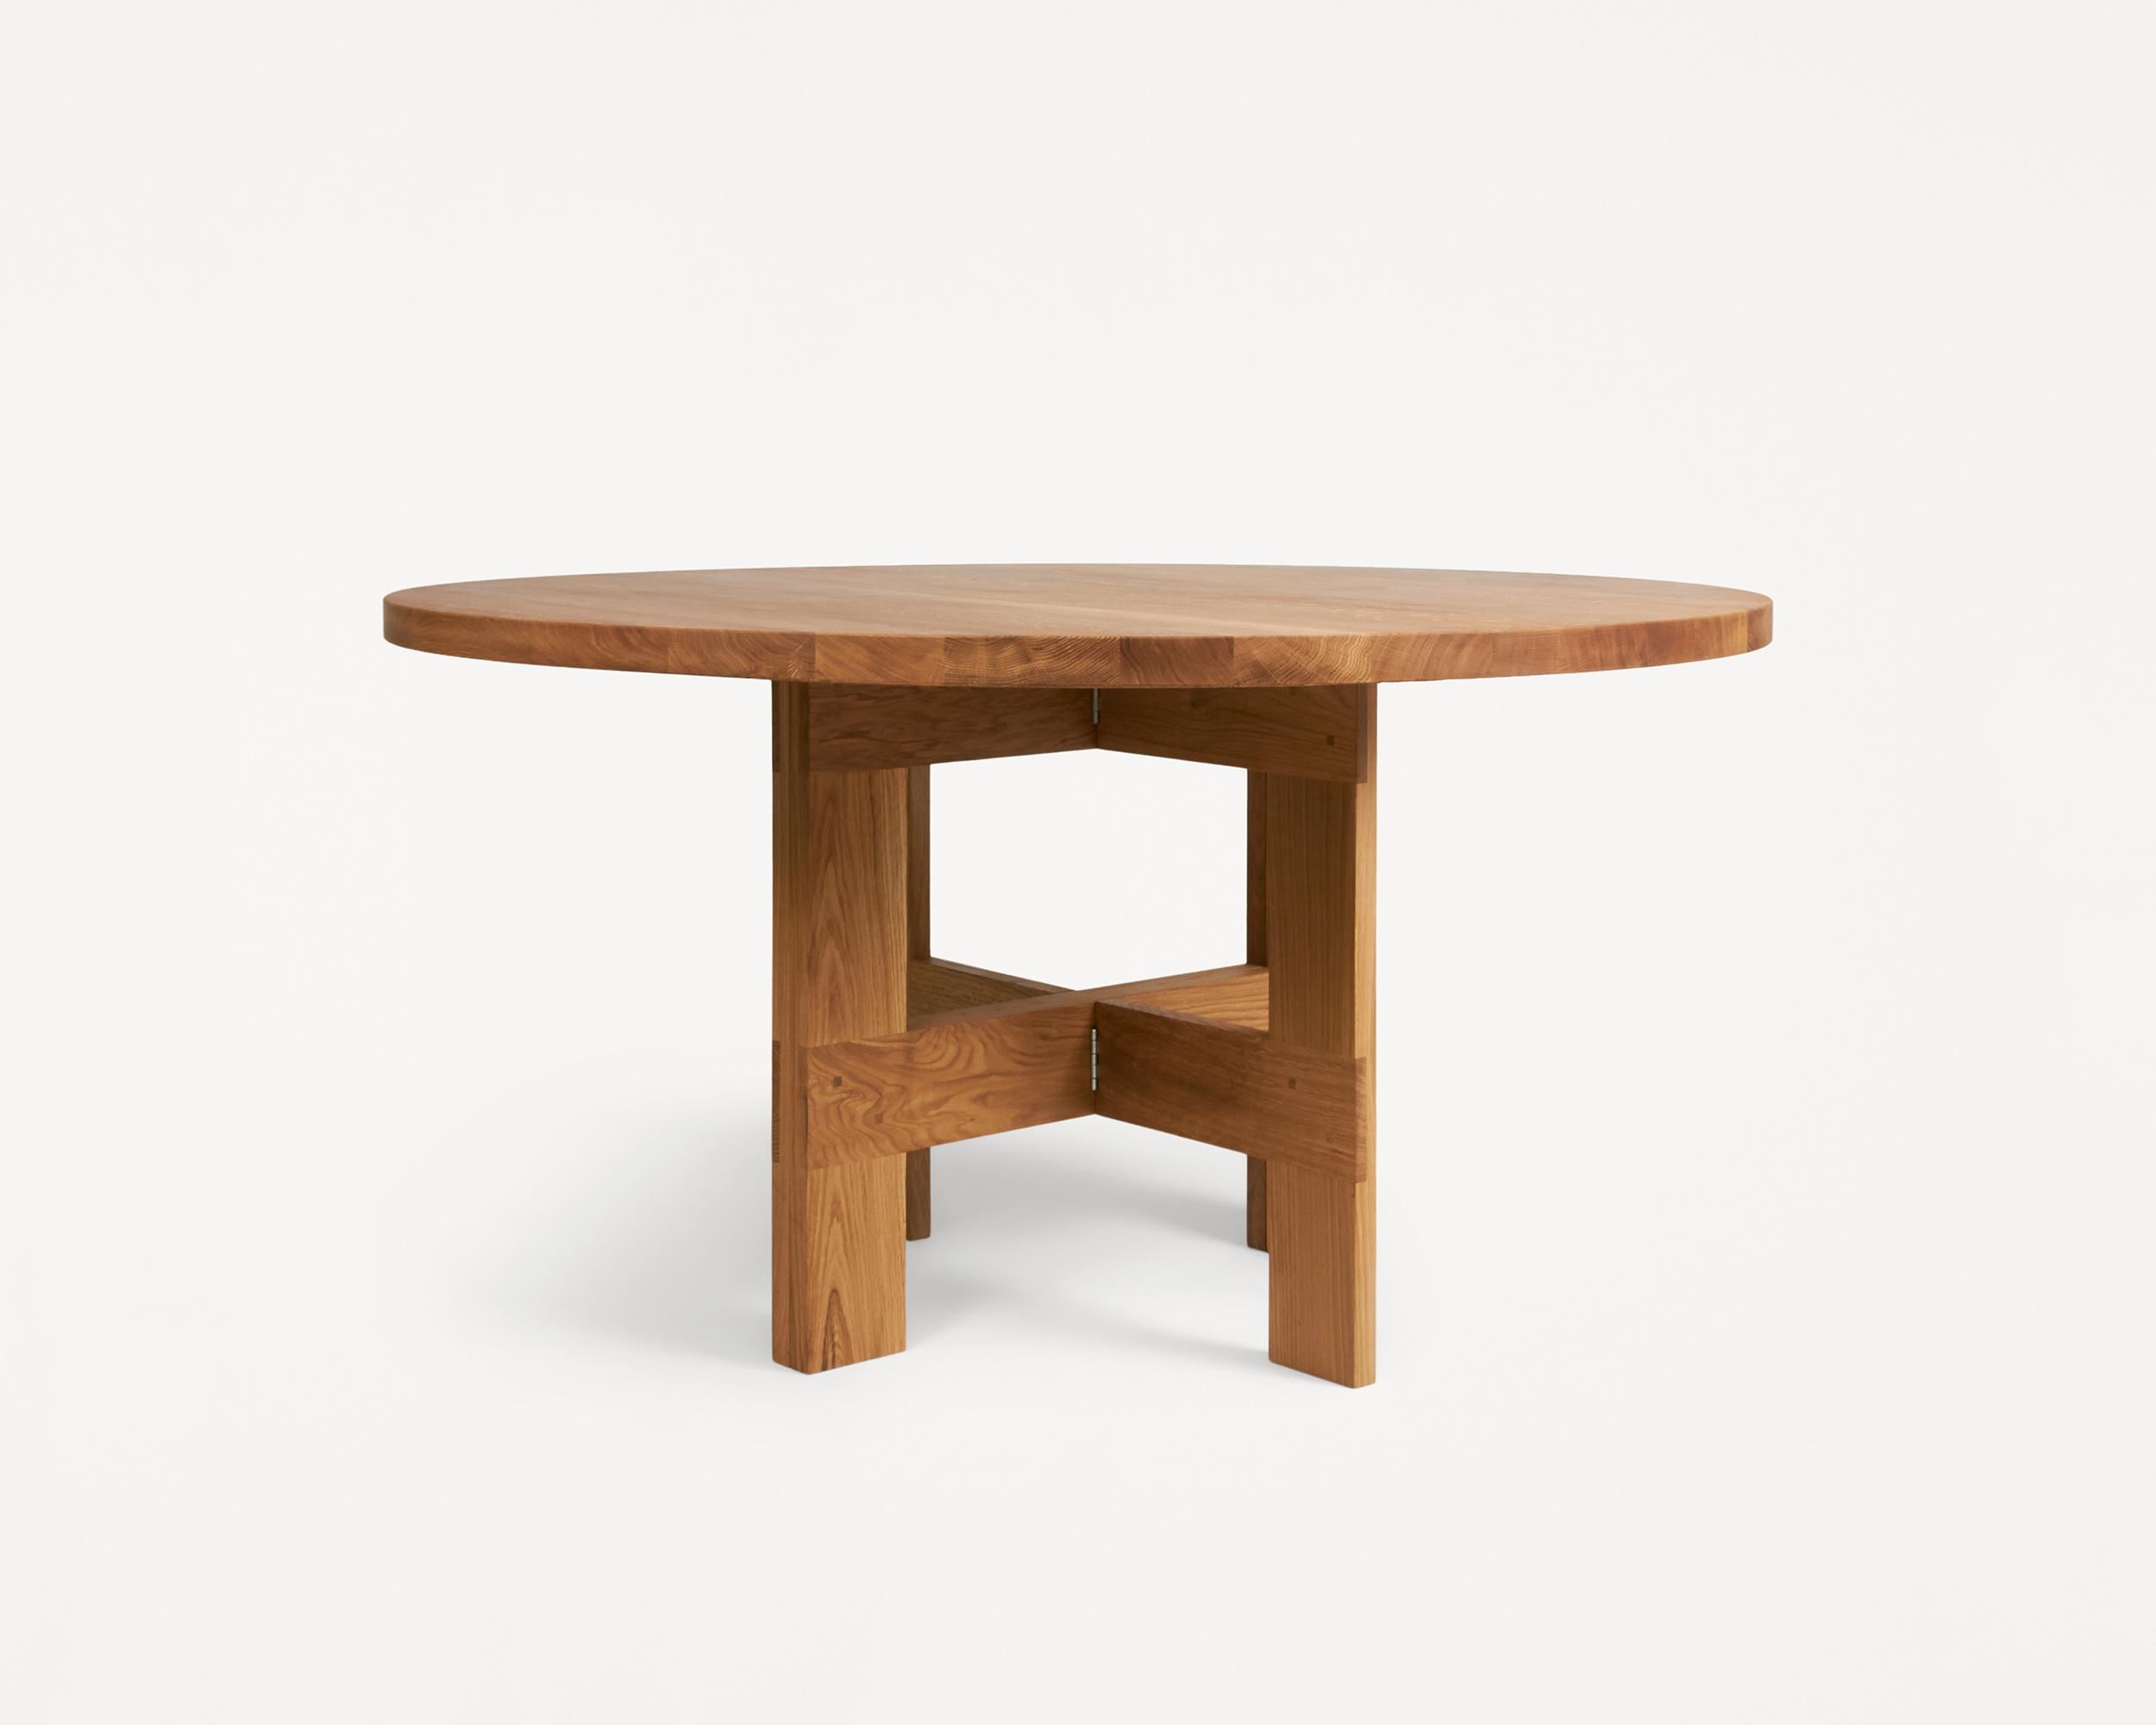 In the sentiment of traditional farmhouses, the table solely inhabits elements of function; abiding to the notion of the simple life on the countryside whilst expressing a rural aesthetic.

The Farmhouse Table is composed of two trestles used in